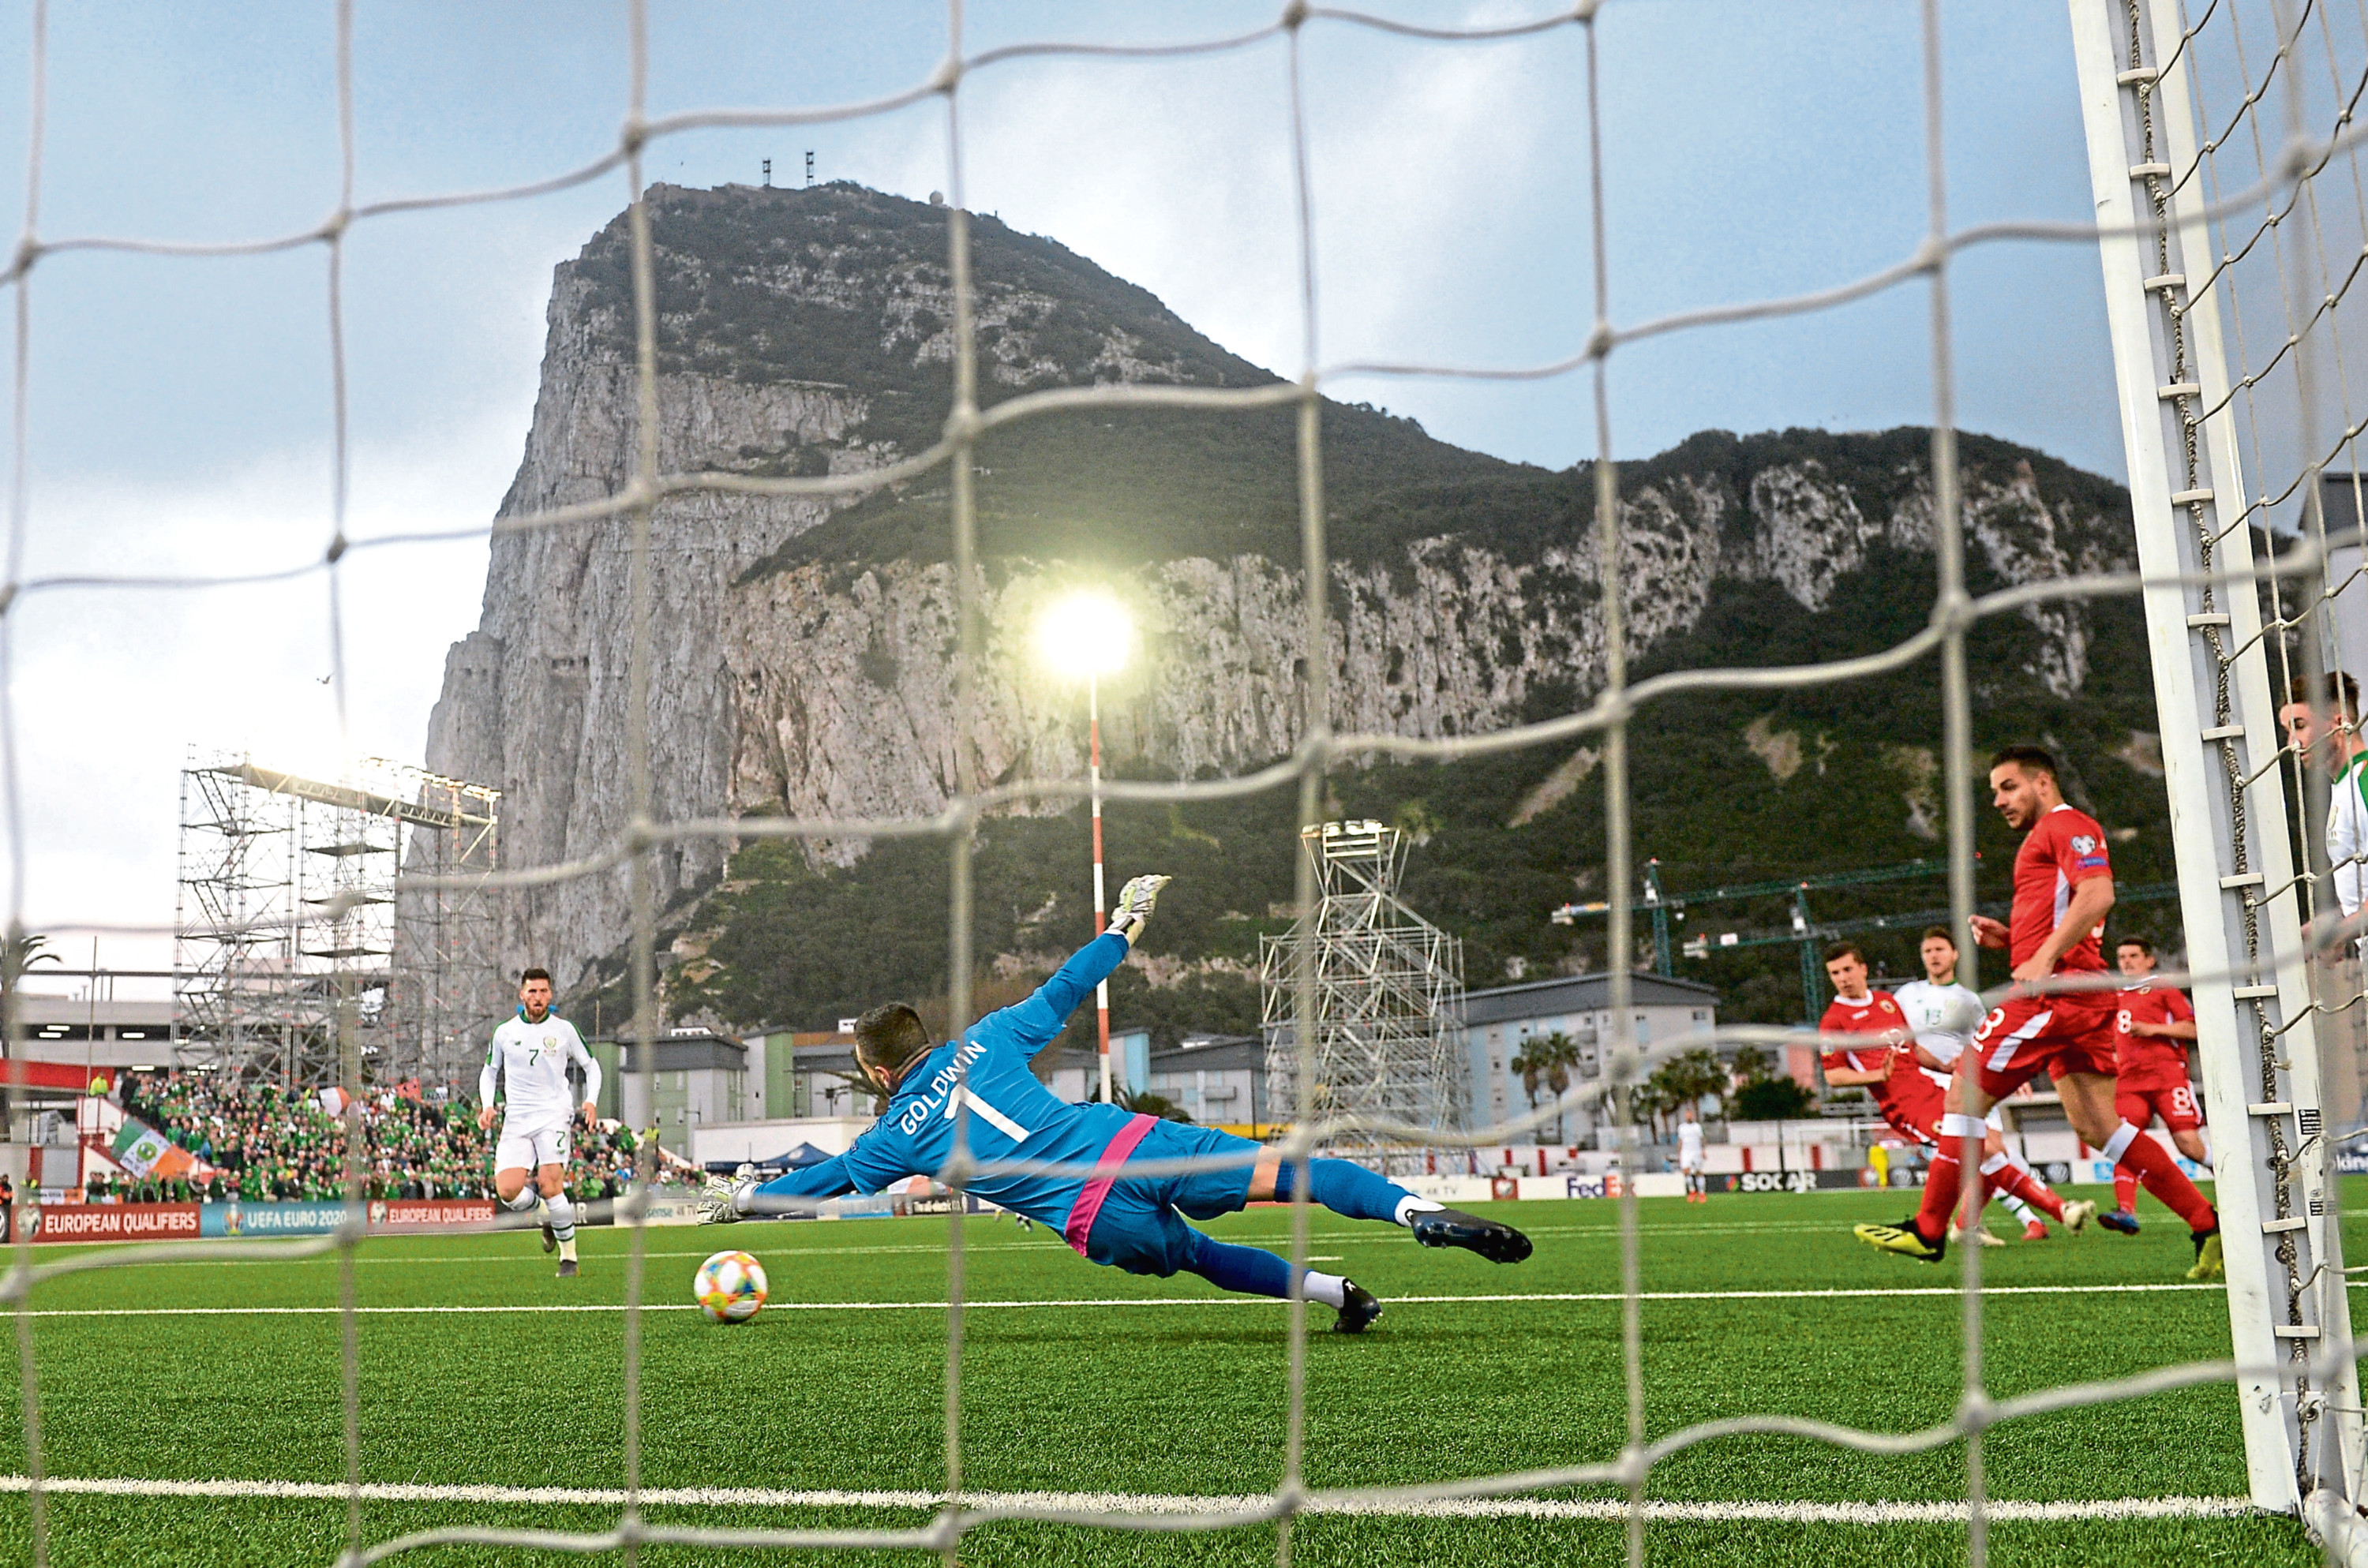 Rangers will face St Joseph’s in the Victoria Stadium, in the shadow of the Rock of Gibraltar